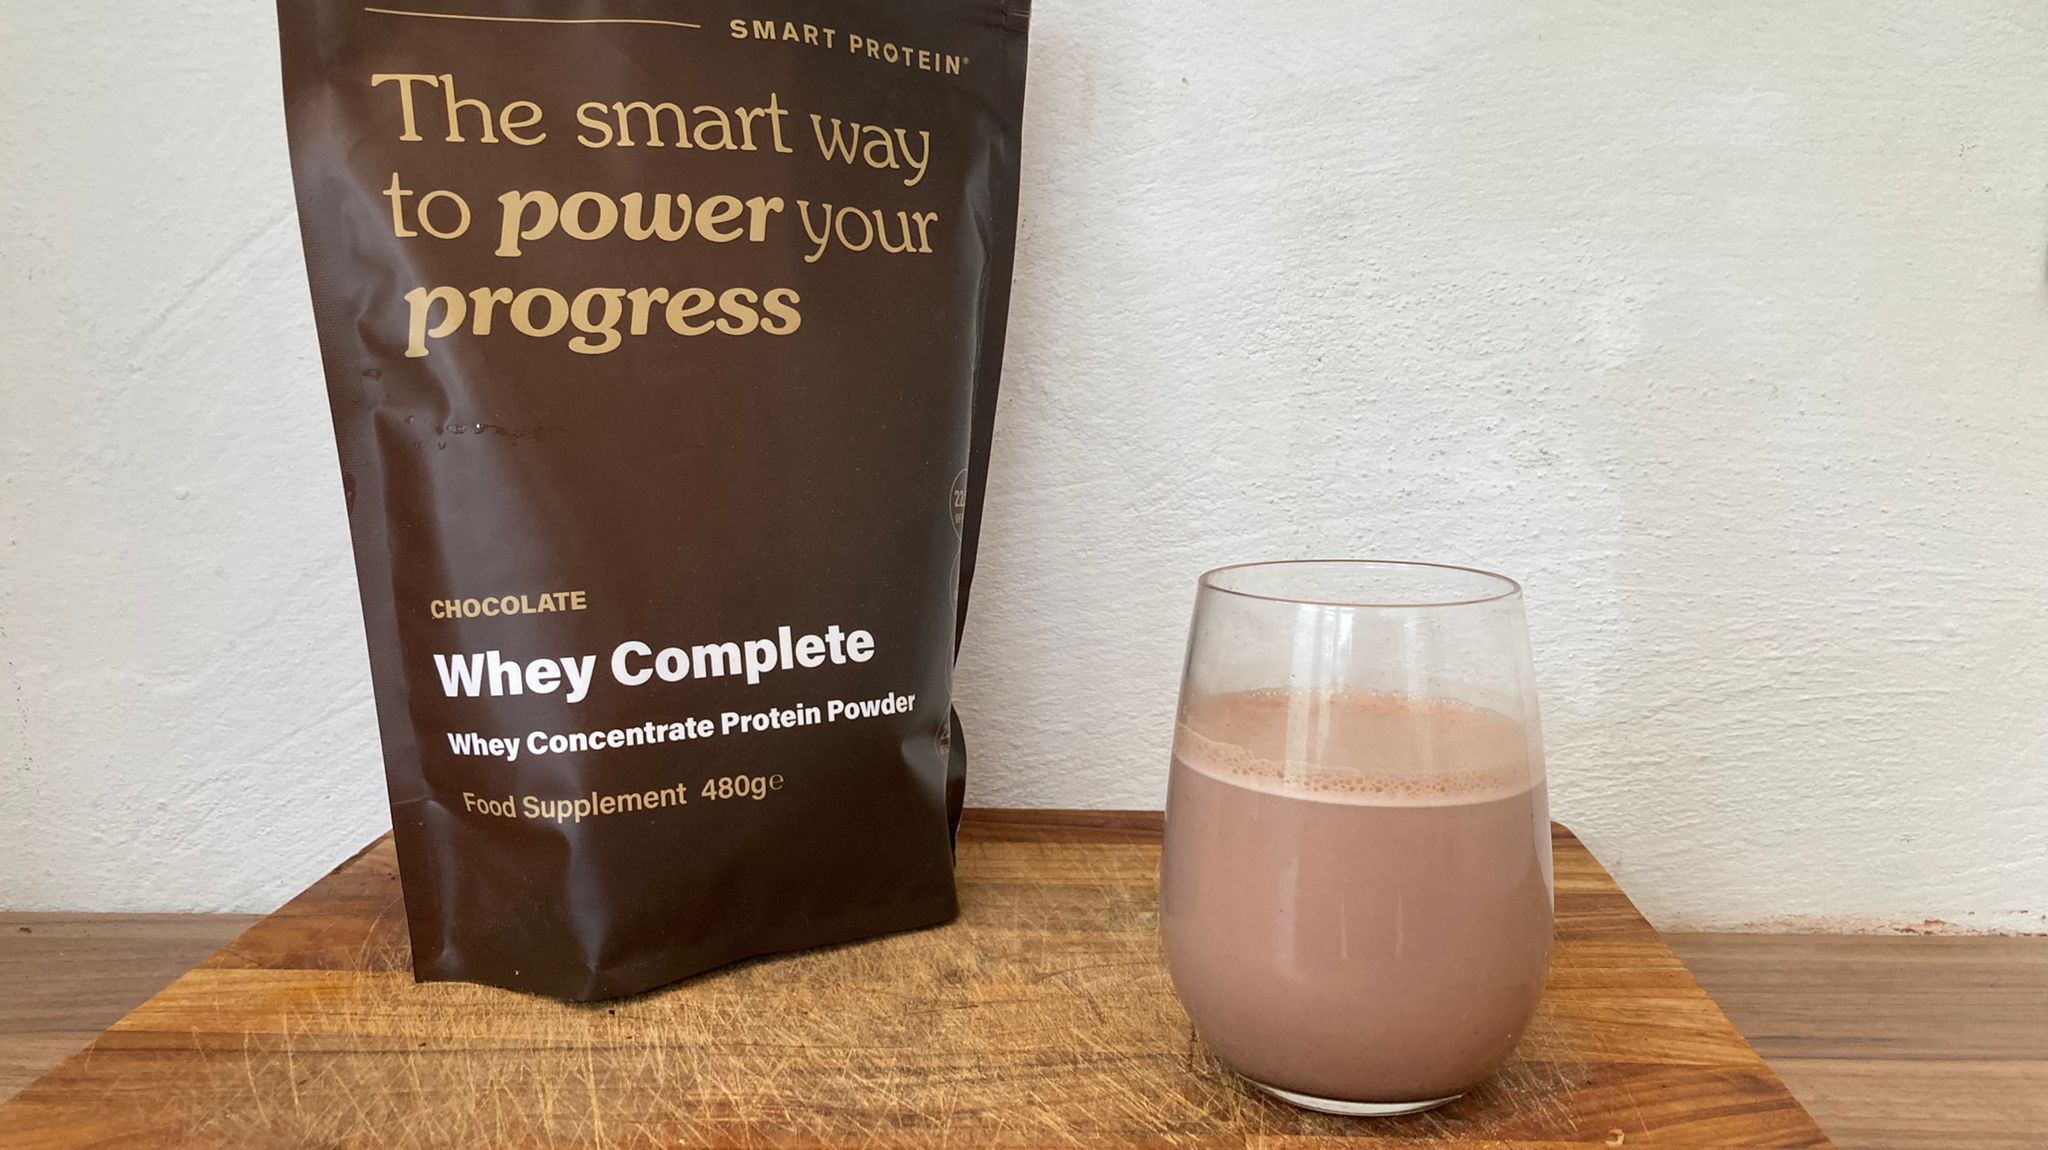 Smart Protein Whey Complete